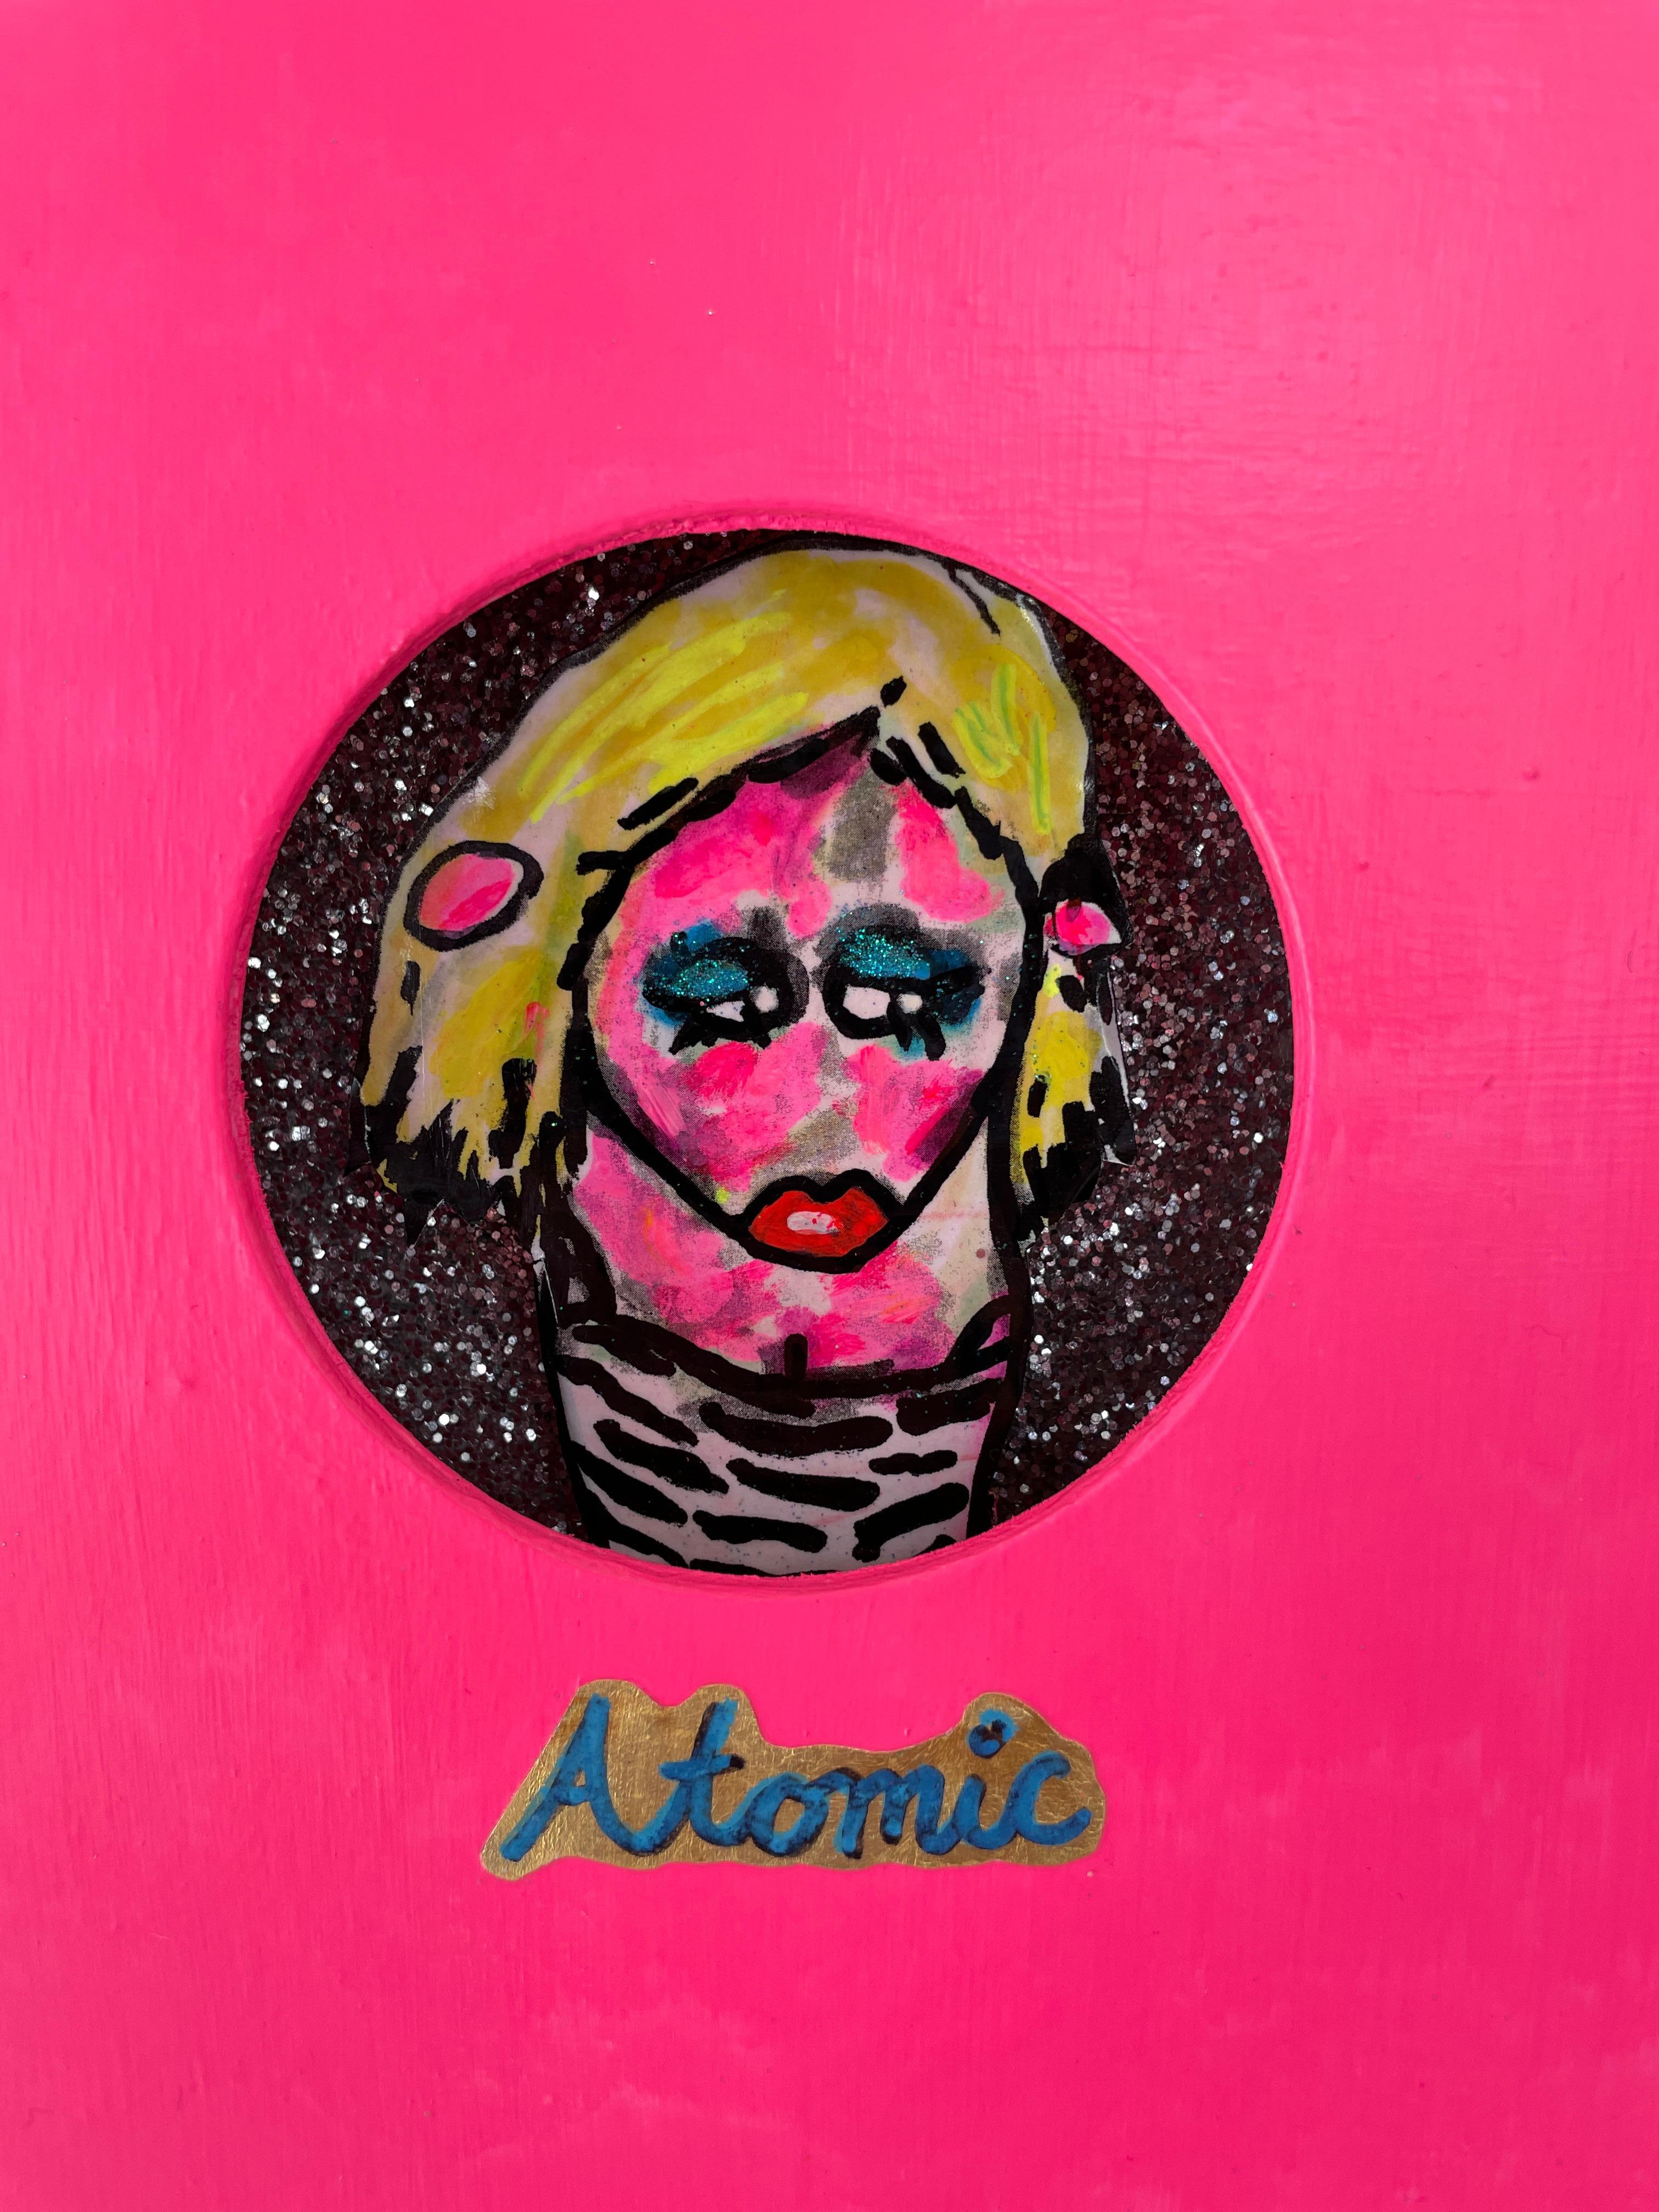 Atomic - mixed media on wood - Painting by Little Ricky